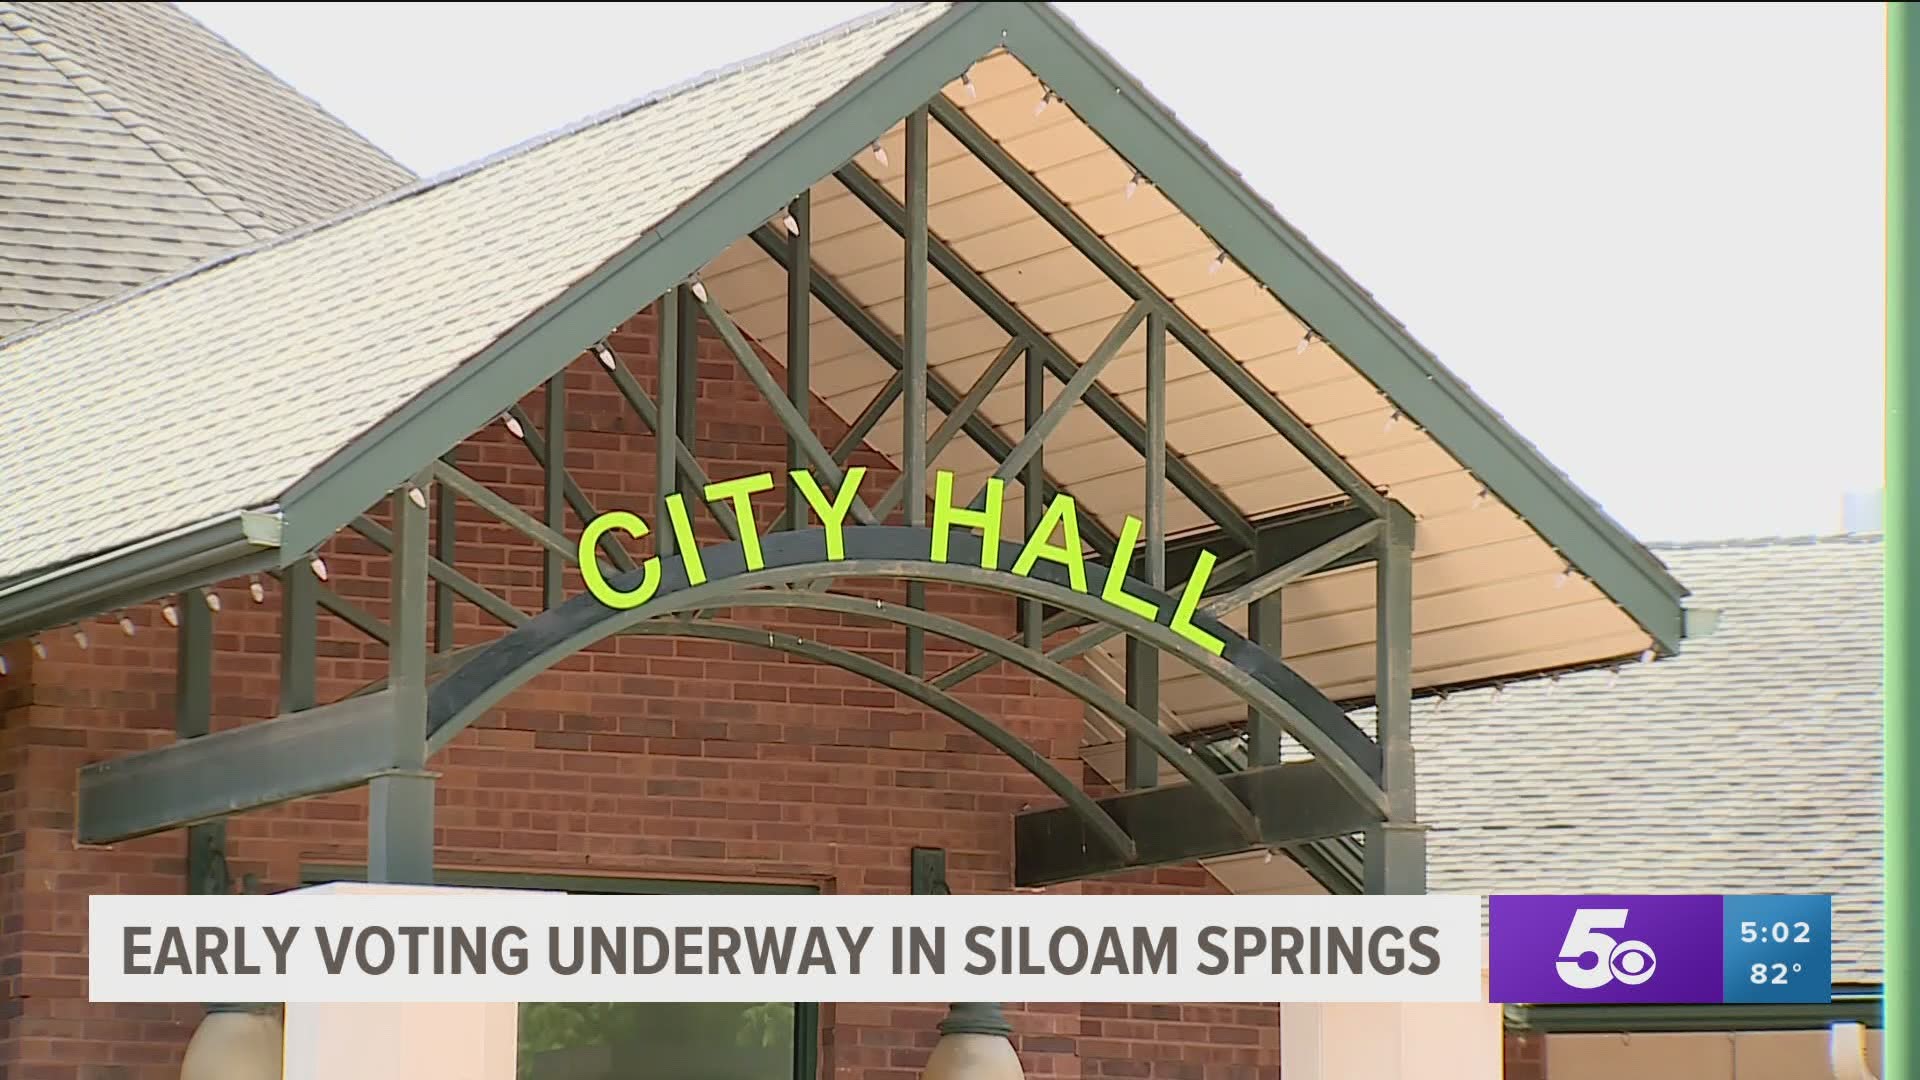 Voters in Siloam Springs will decide on three open city board positions on August 11, 2020.